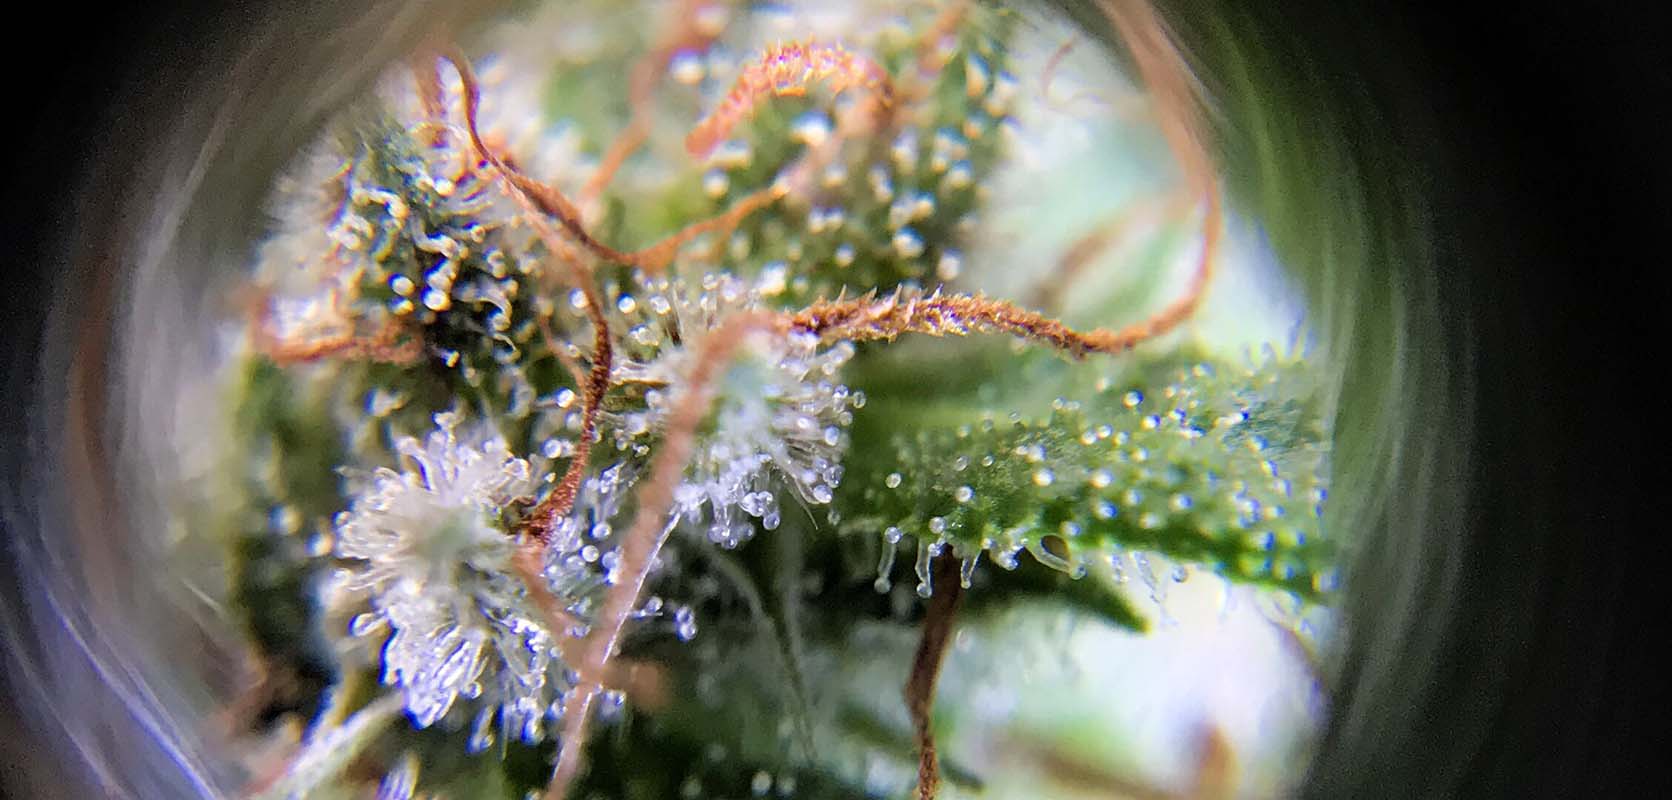 Capitate-sessile Trichomes on weed. buy weeds online. mail order weed canada. weed online